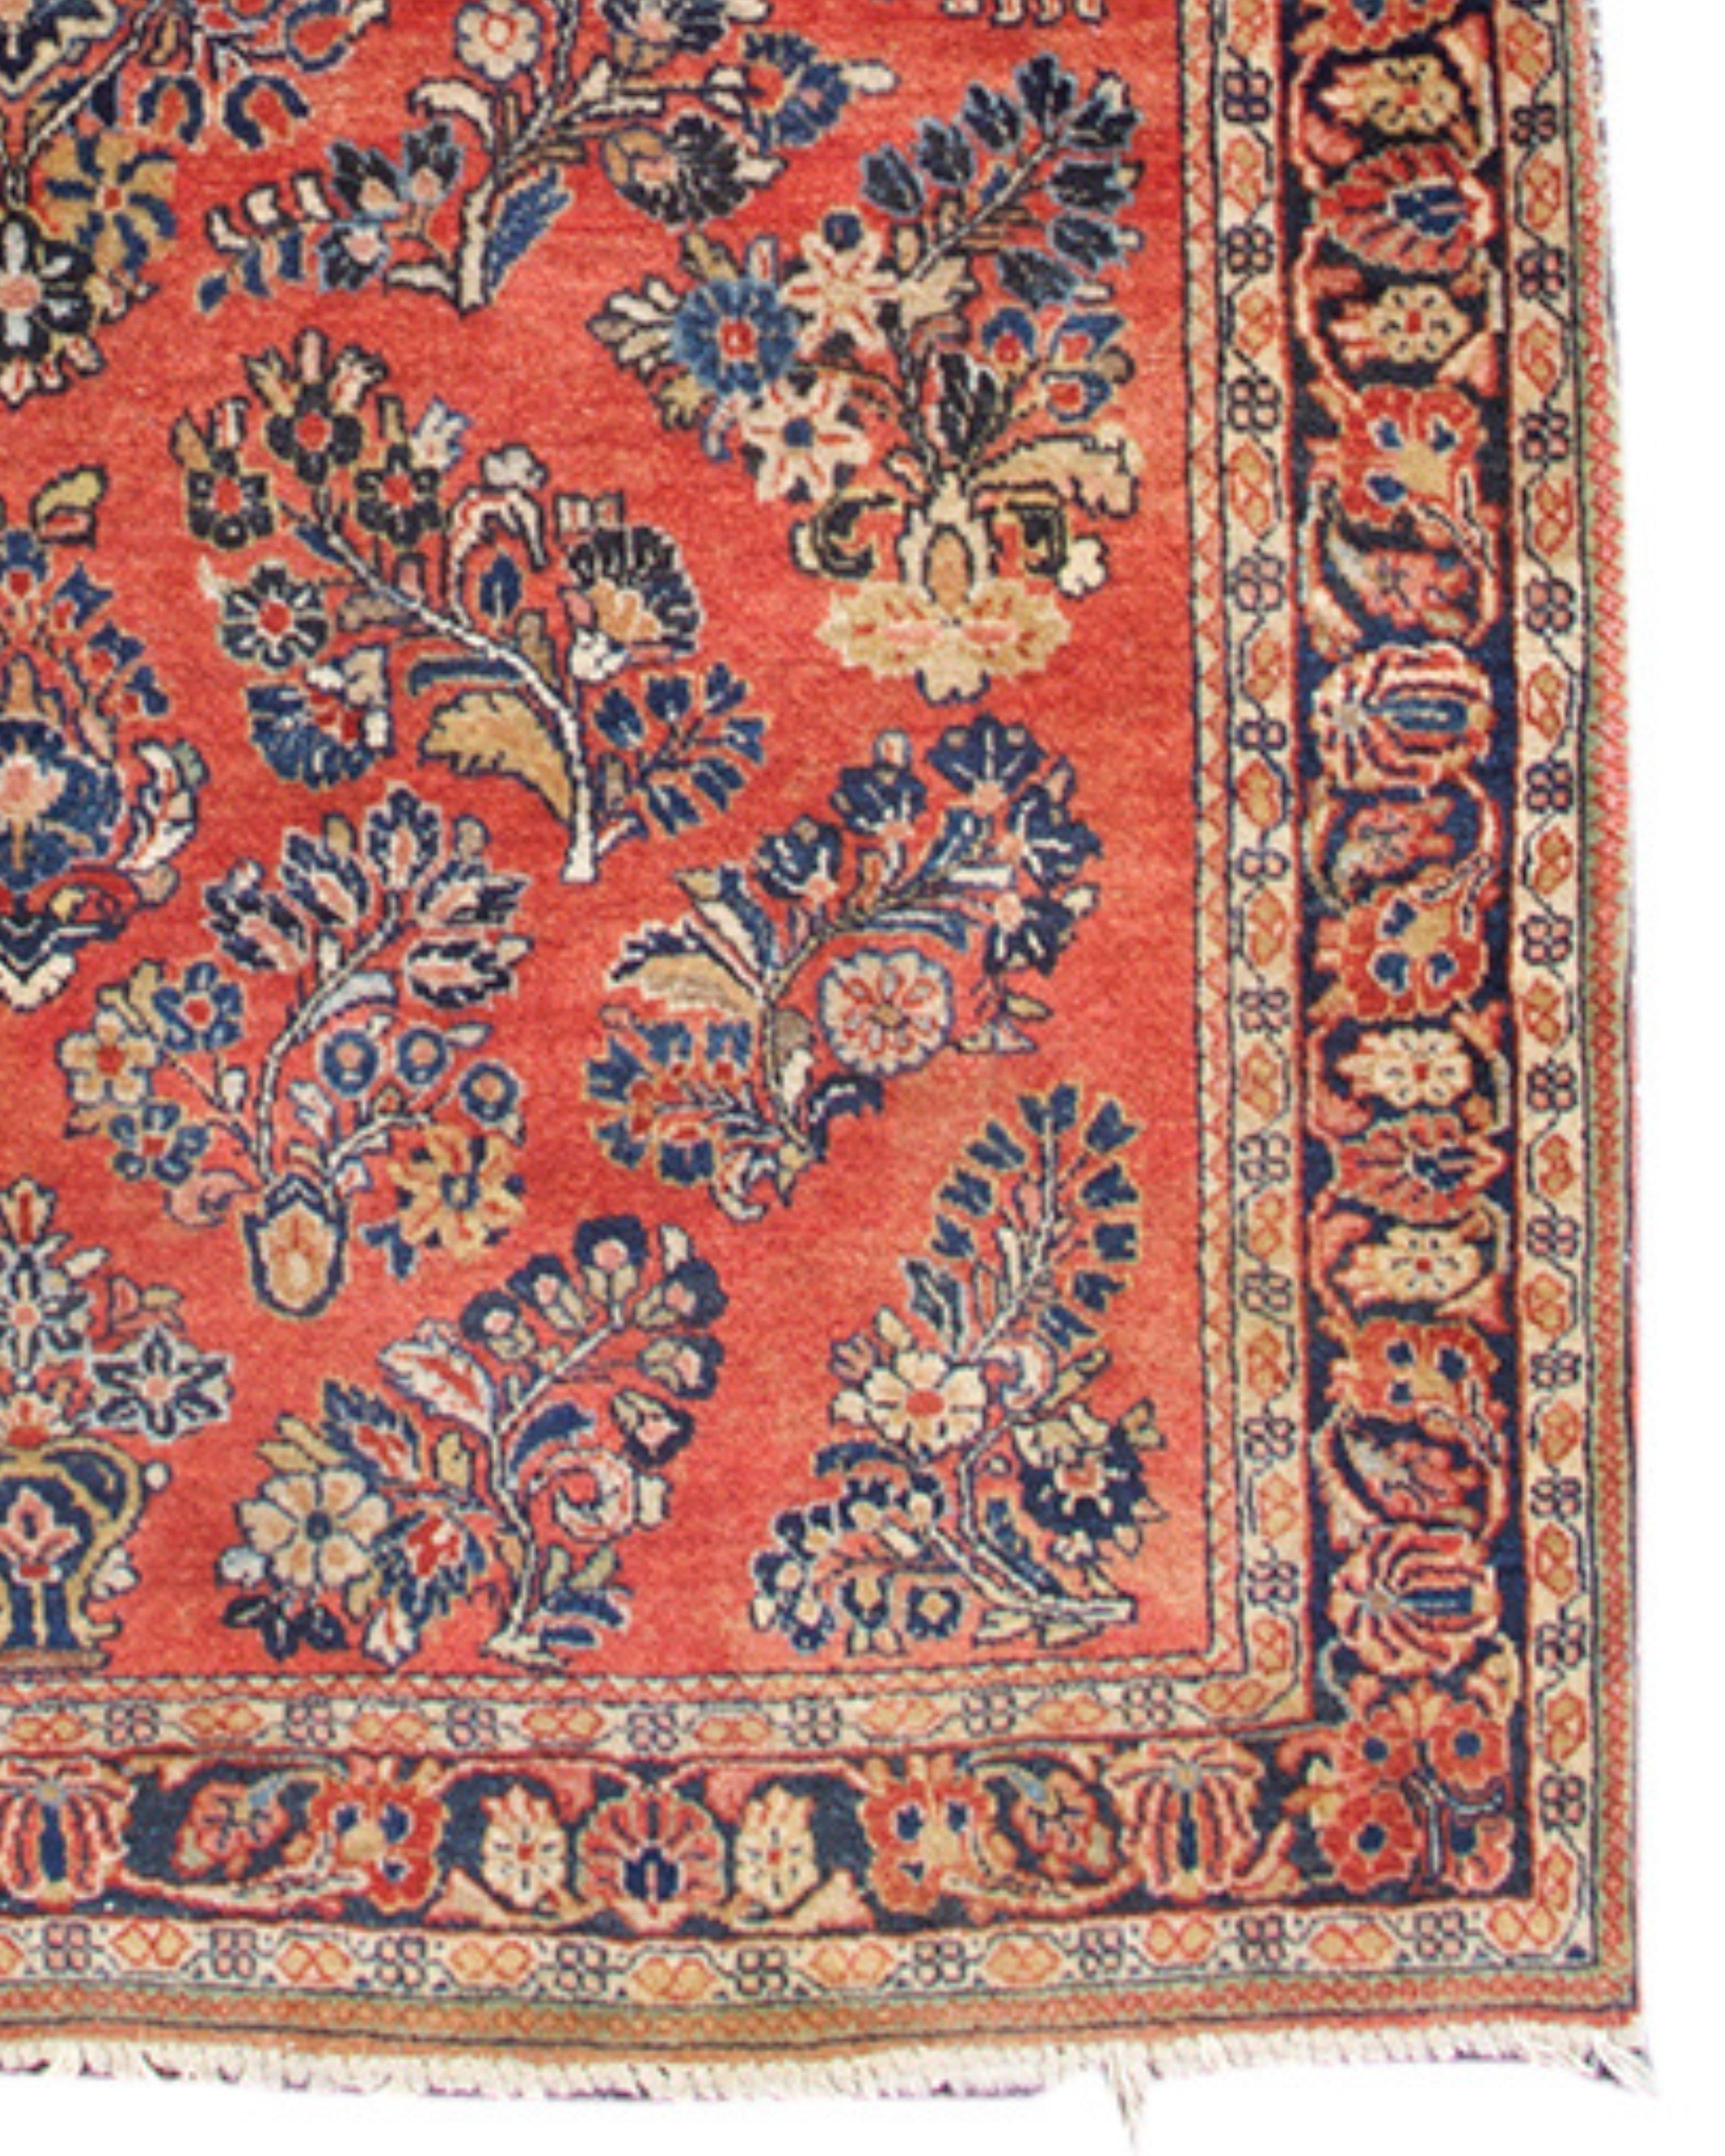 Antique Persian Sarouk Rug, 20th Century In Excellent Condition For Sale In San Francisco, CA